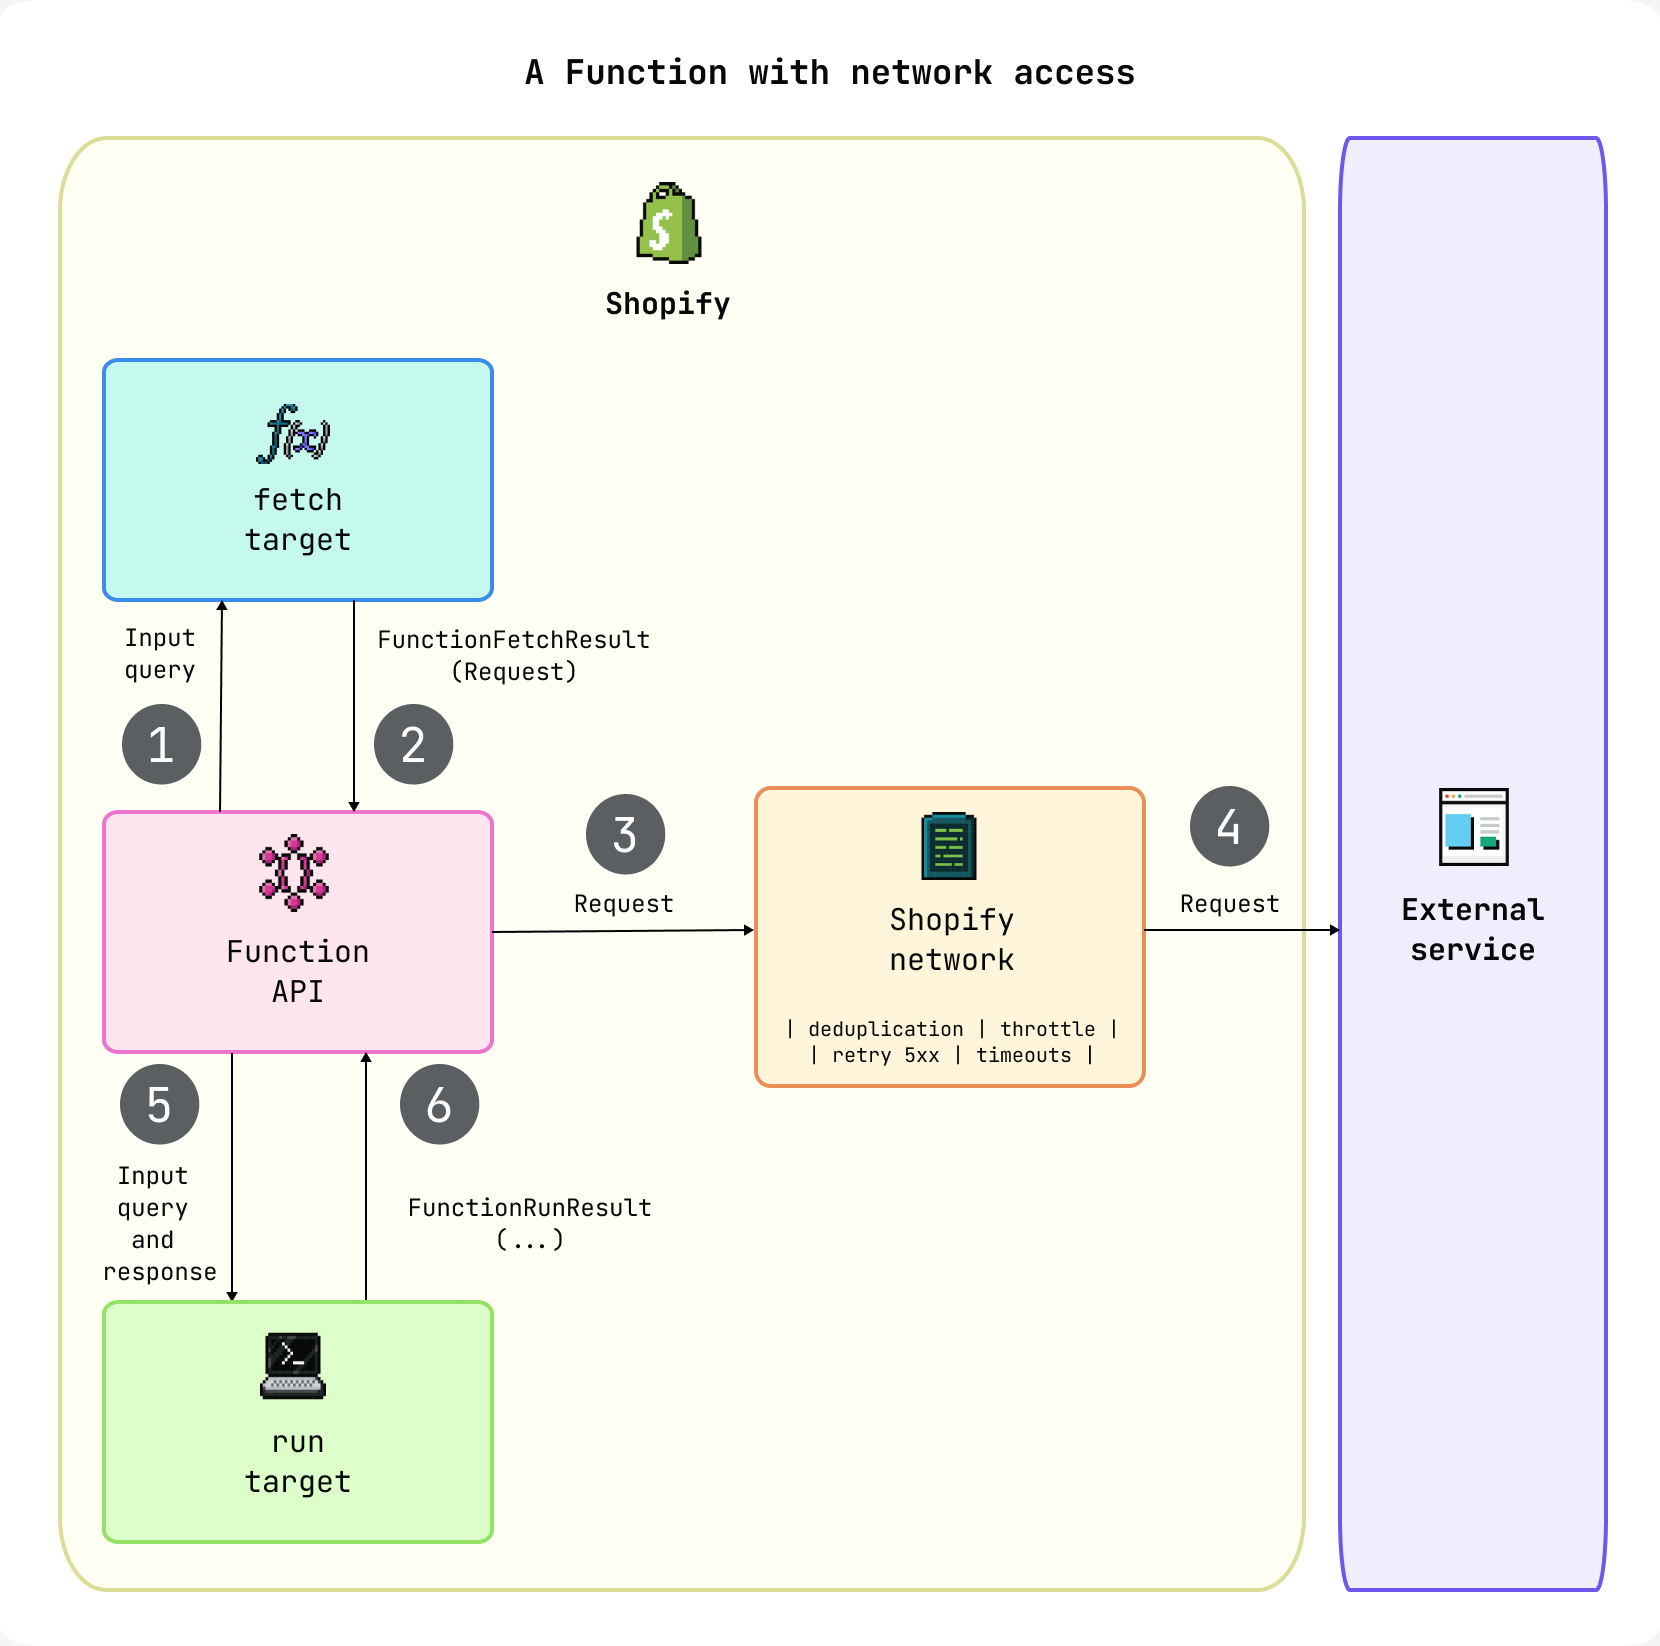 An overview of the requests associated with a function that has network access